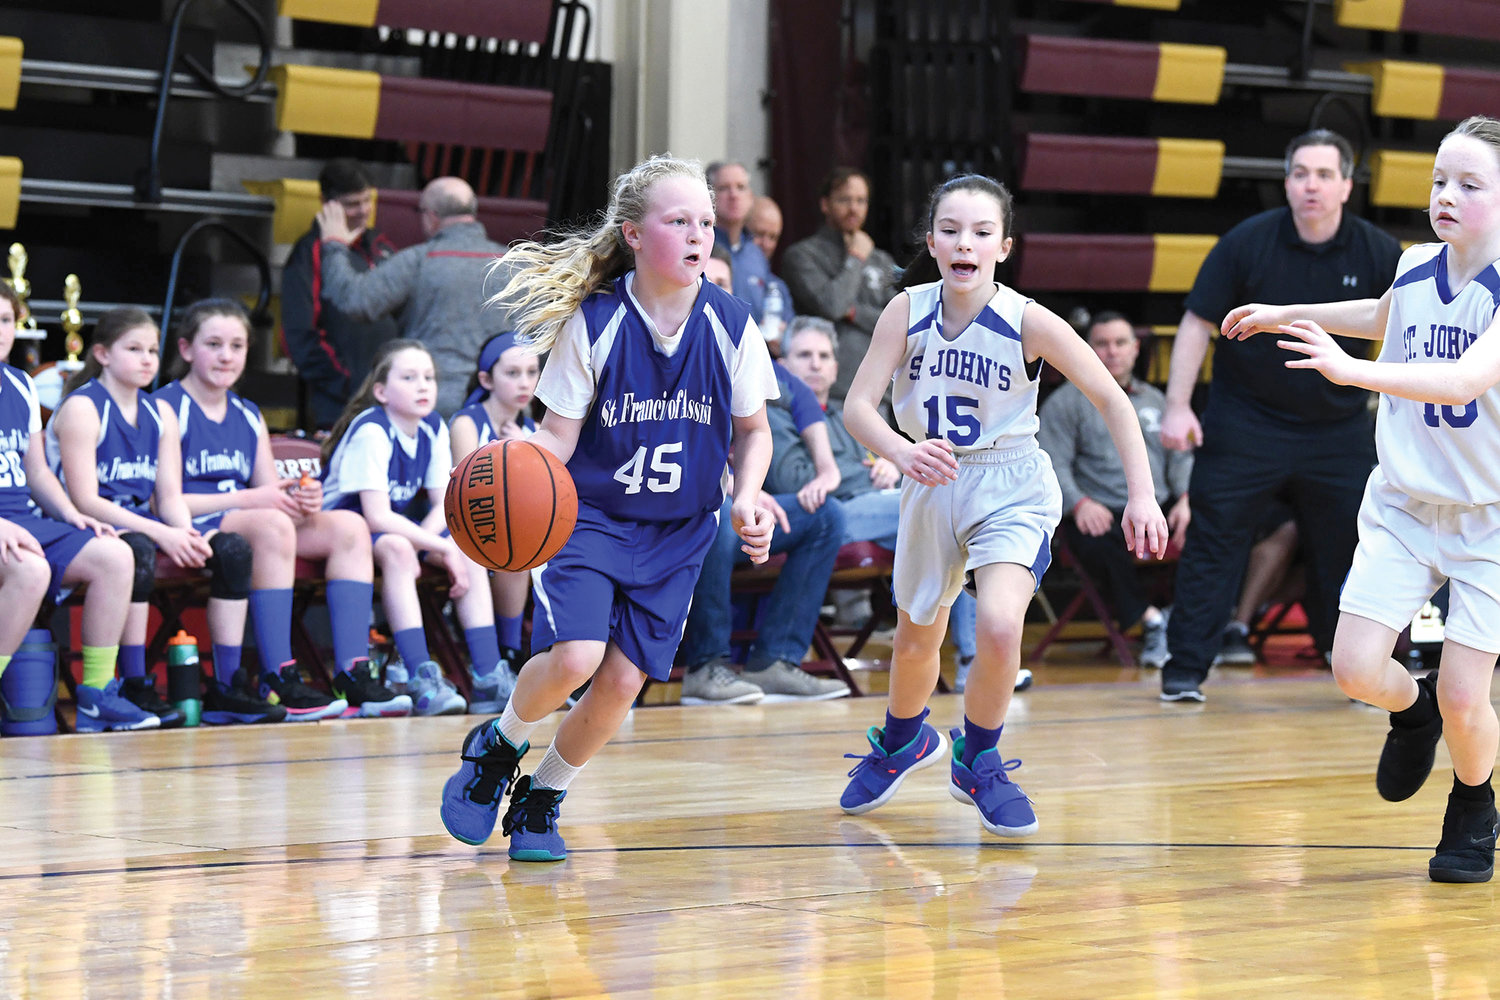 CYO New York is planning a Feb. 5 start date for its first season of basketball since 2019-2020 when the arrival of the Covid-19 pandemic canceled the archdiocesan championship tournament in March. In this 2019 photo, Carley Voce of St. Francis of Assisi, West Nyack, drives to the basket against Gianna Dolan, center, and Ashley Koch, right, of St. John the Evangelist, Mahopac, in the fifth-grade girls’ championship game.